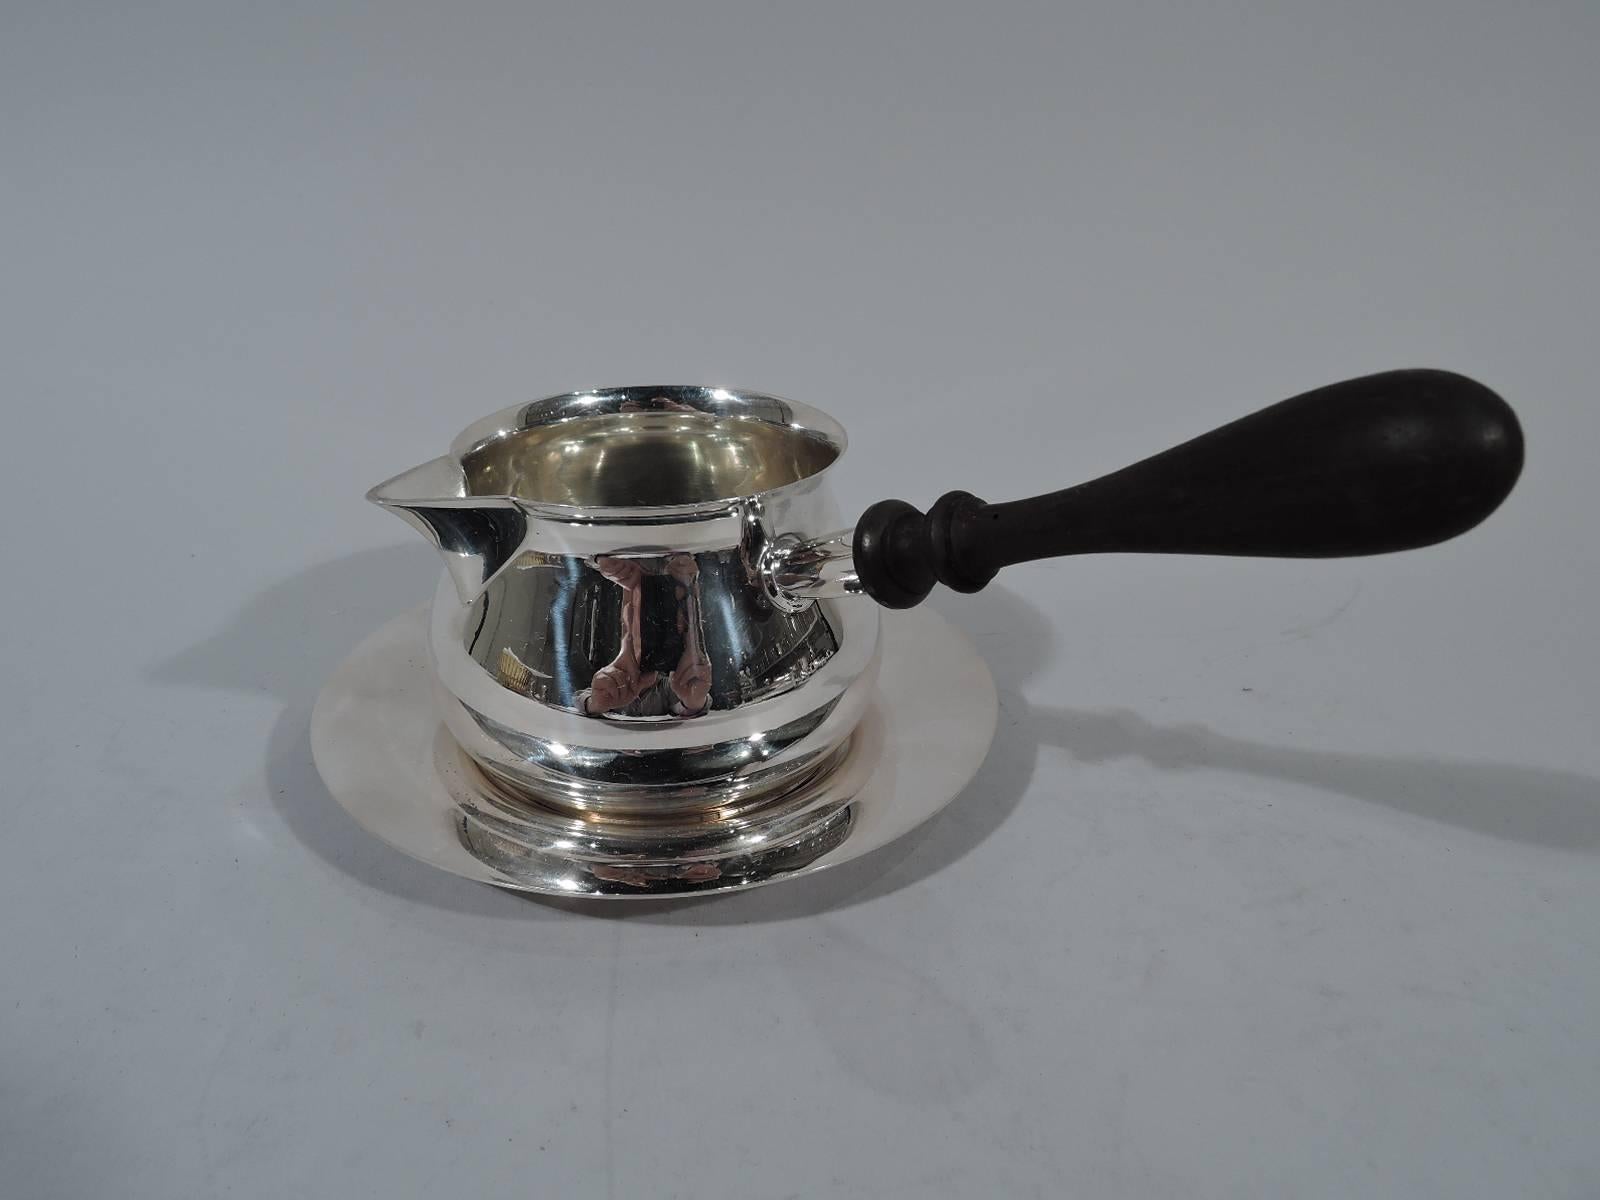 Georgian Sterling silver pipkin on Stand. Made by Tuttle in Boston in 1953. Pipkin: Curved and upward tapering bowl with sharp v-spout and stained-wood baluster handle. Stand: Circular with well. Hallmarks include no. 142 and presidential date code.